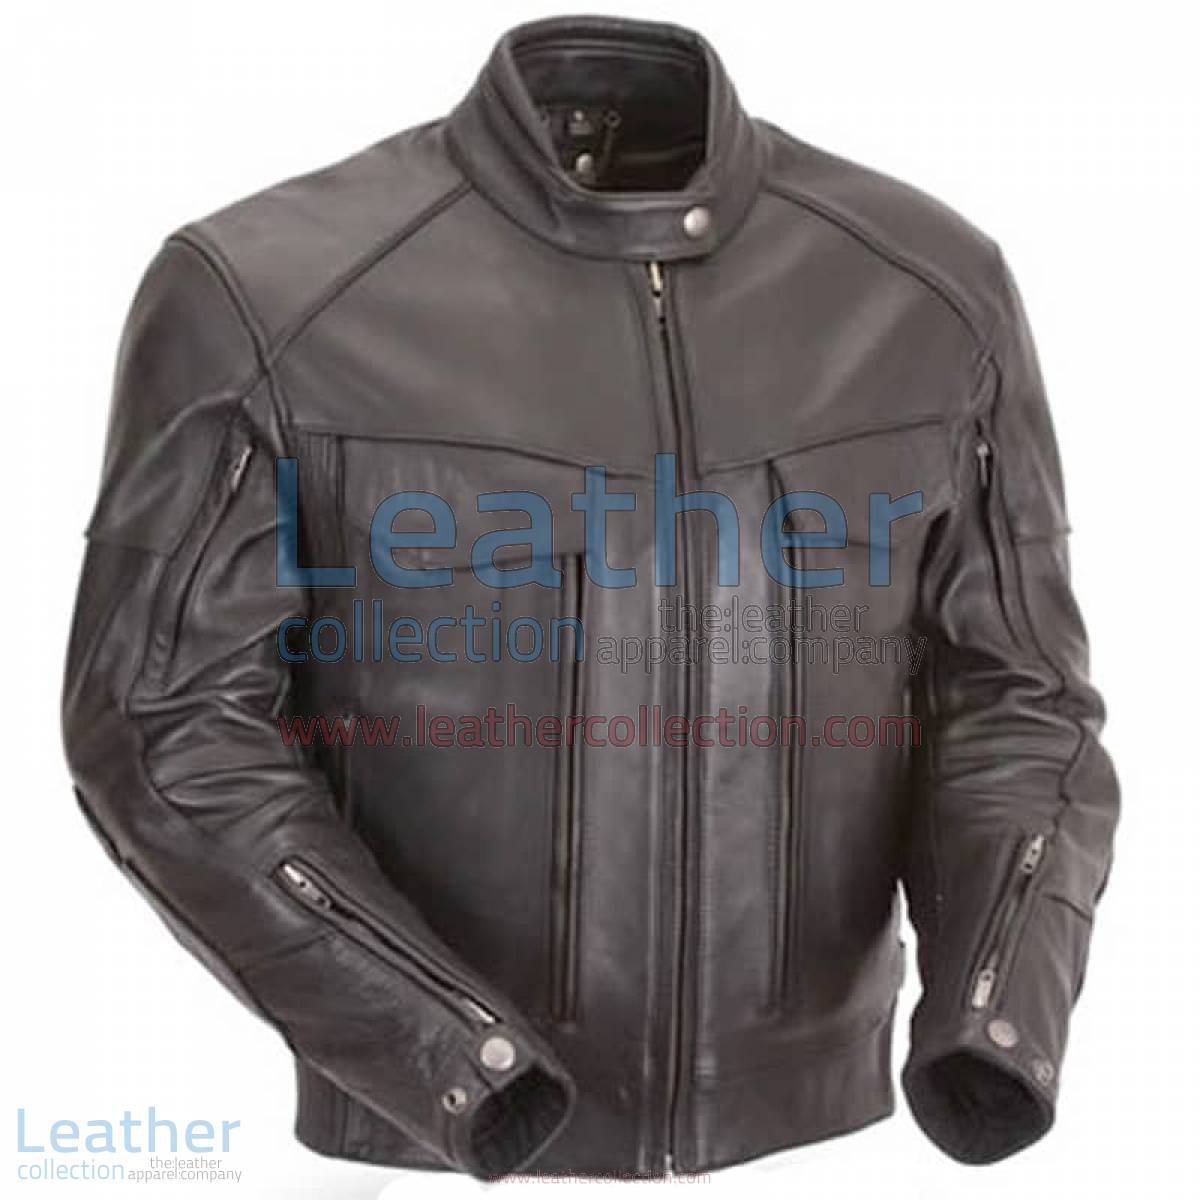 Naked Leather Riding Jacket with Gun Pockets & Side Stretch Panels | riding jacket,leather riding jacket